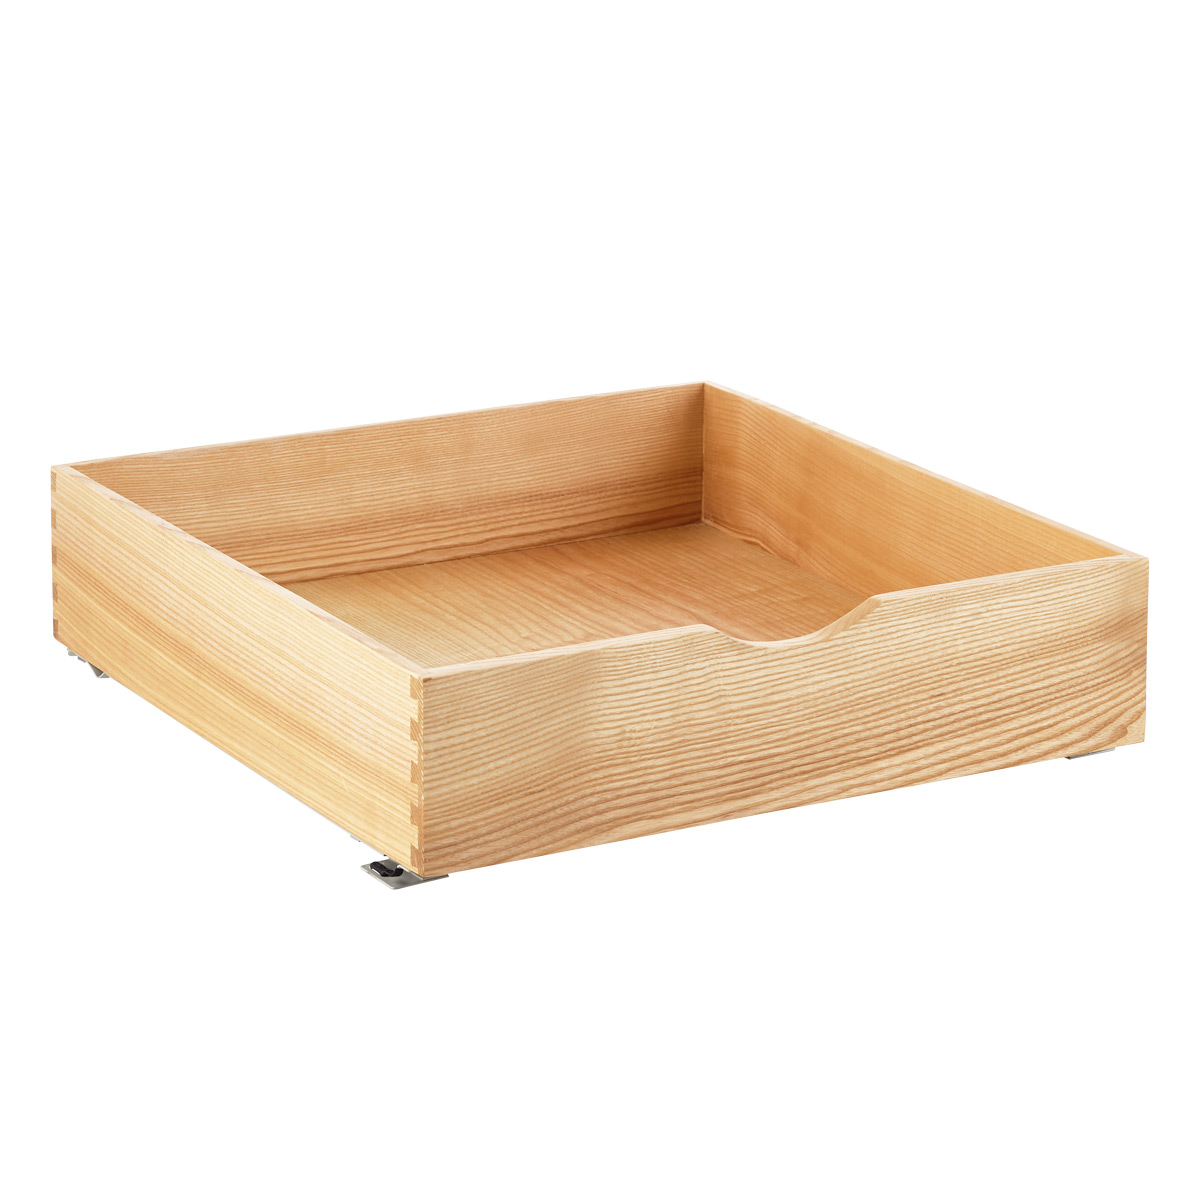 https://www.containerstore.com/catalogimages/372899/10054219-roll-out-drawers-ash-wood-2.jpg